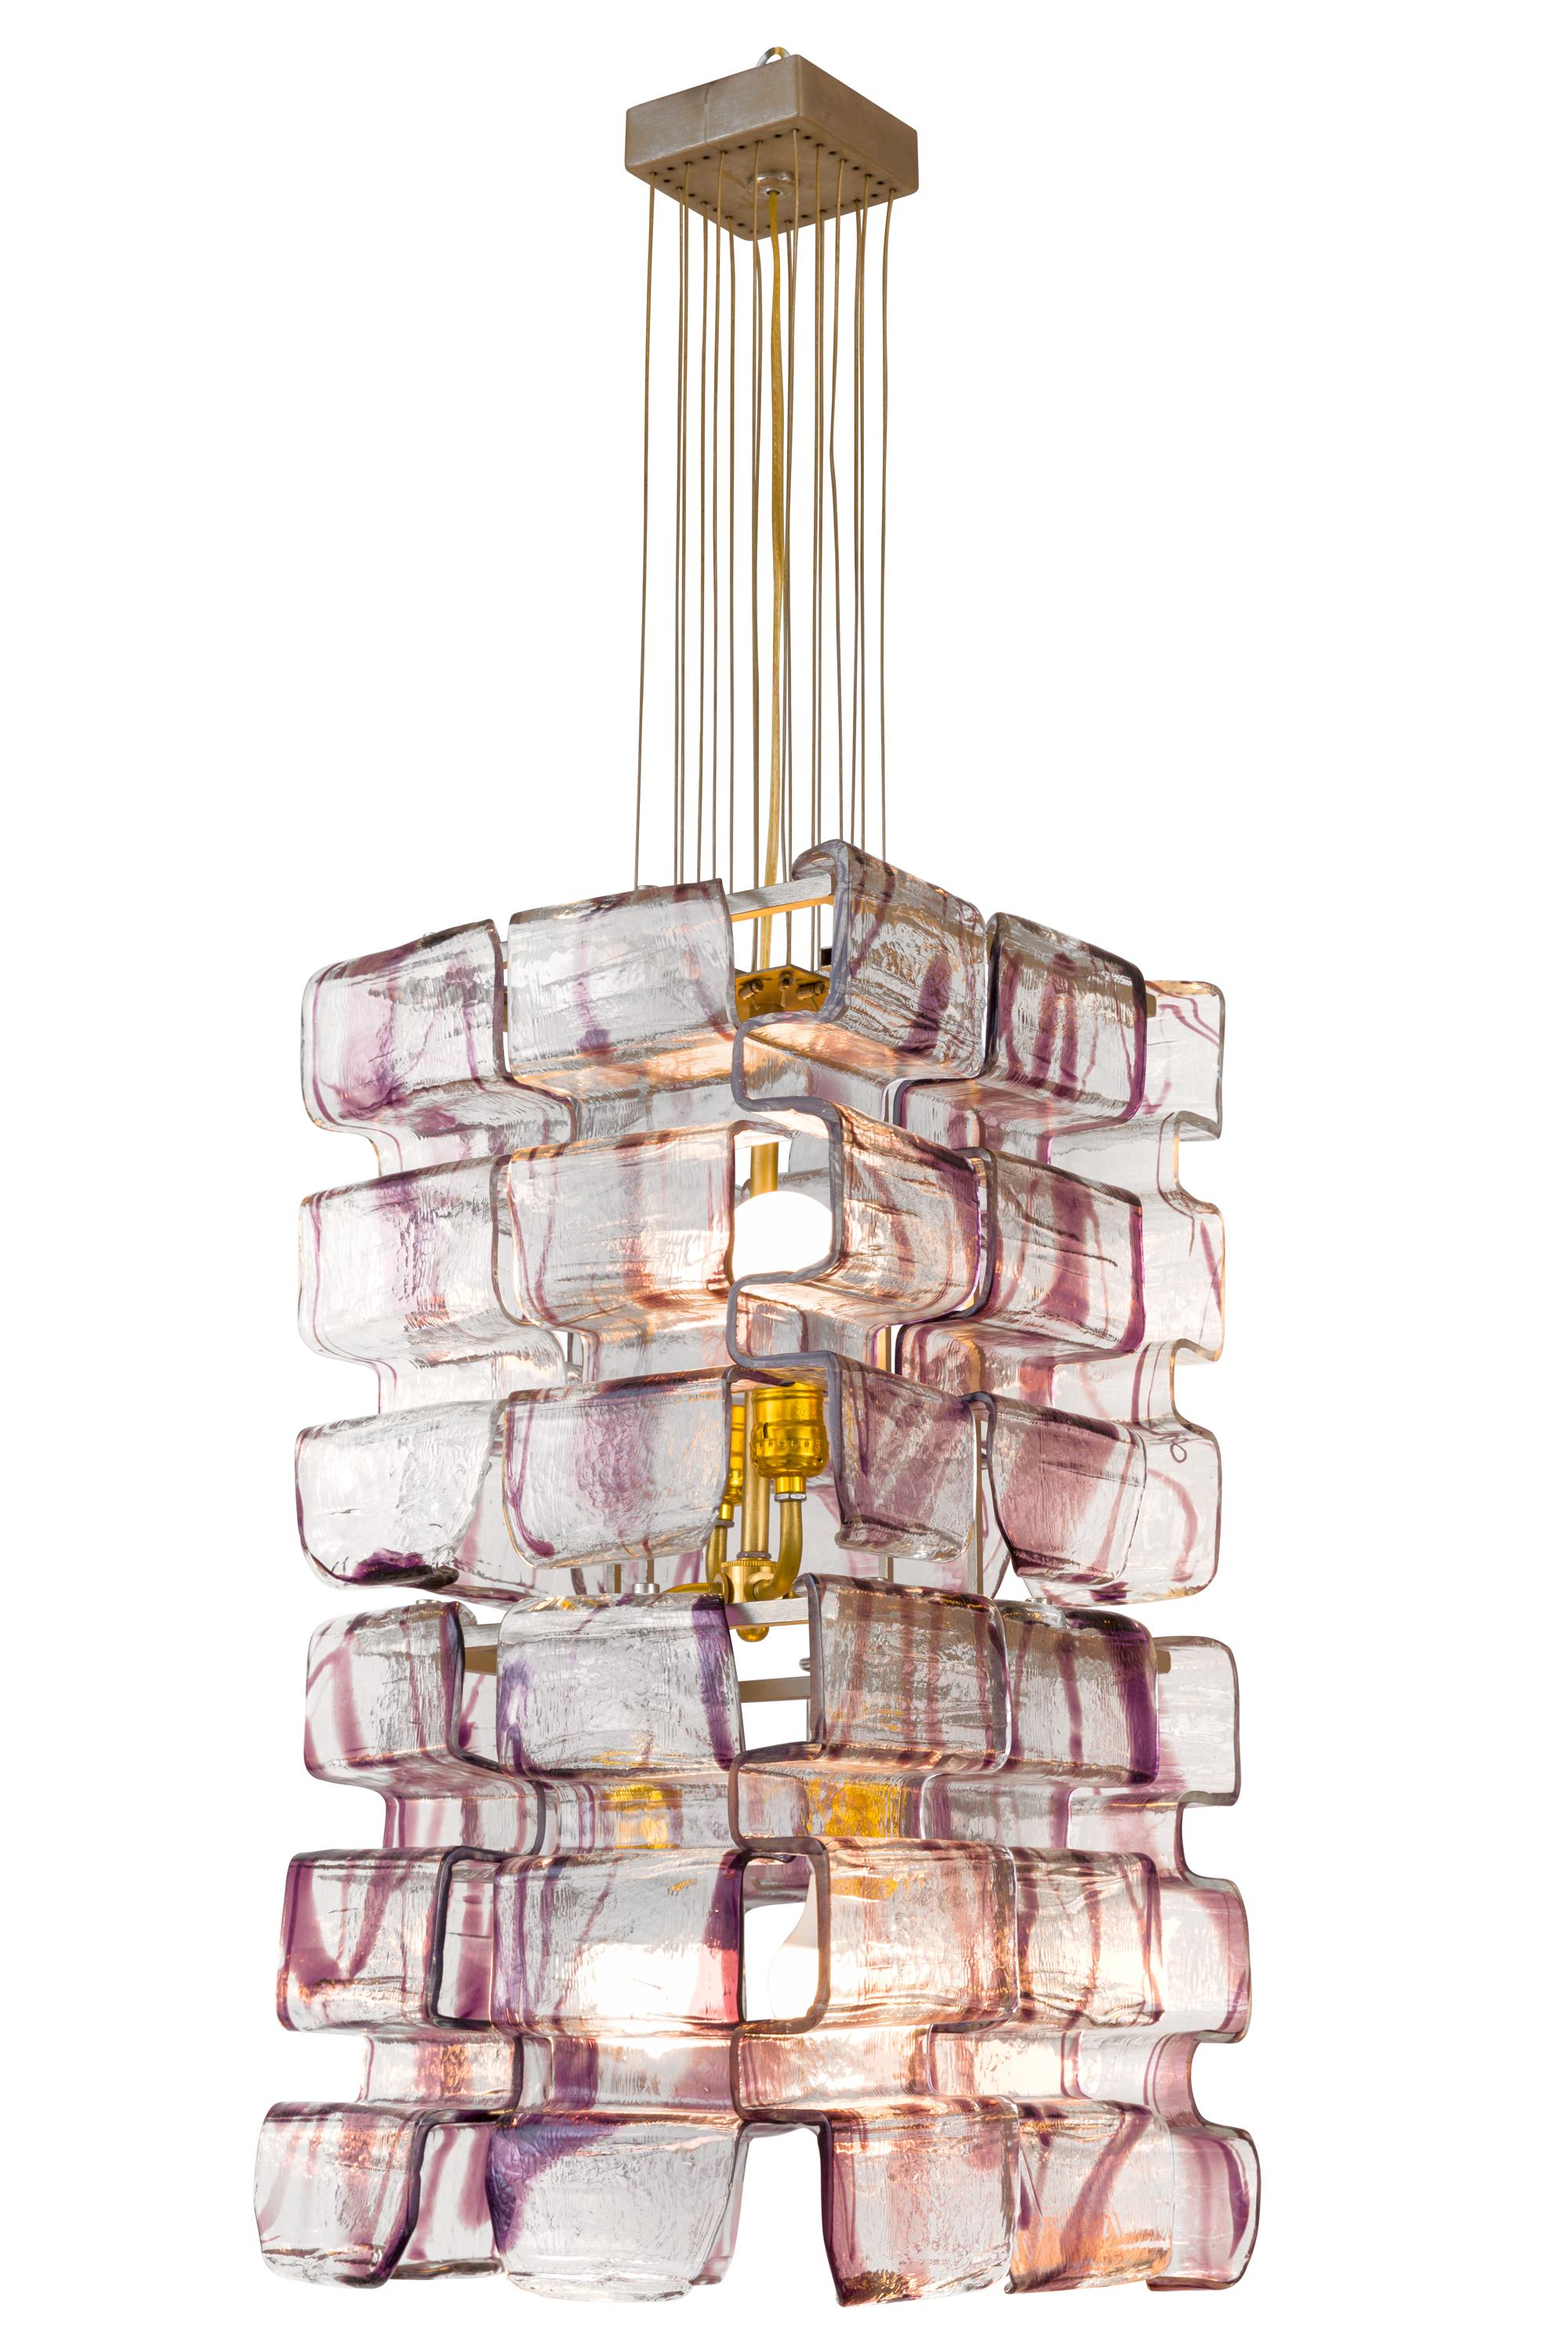 One of a series of chandeliers that were originally in a casino in Italy. They have a spectacular look due to the shape of the Murano glass elements that hang from the frame. We have numerous sizes available. The measurements indicated include the